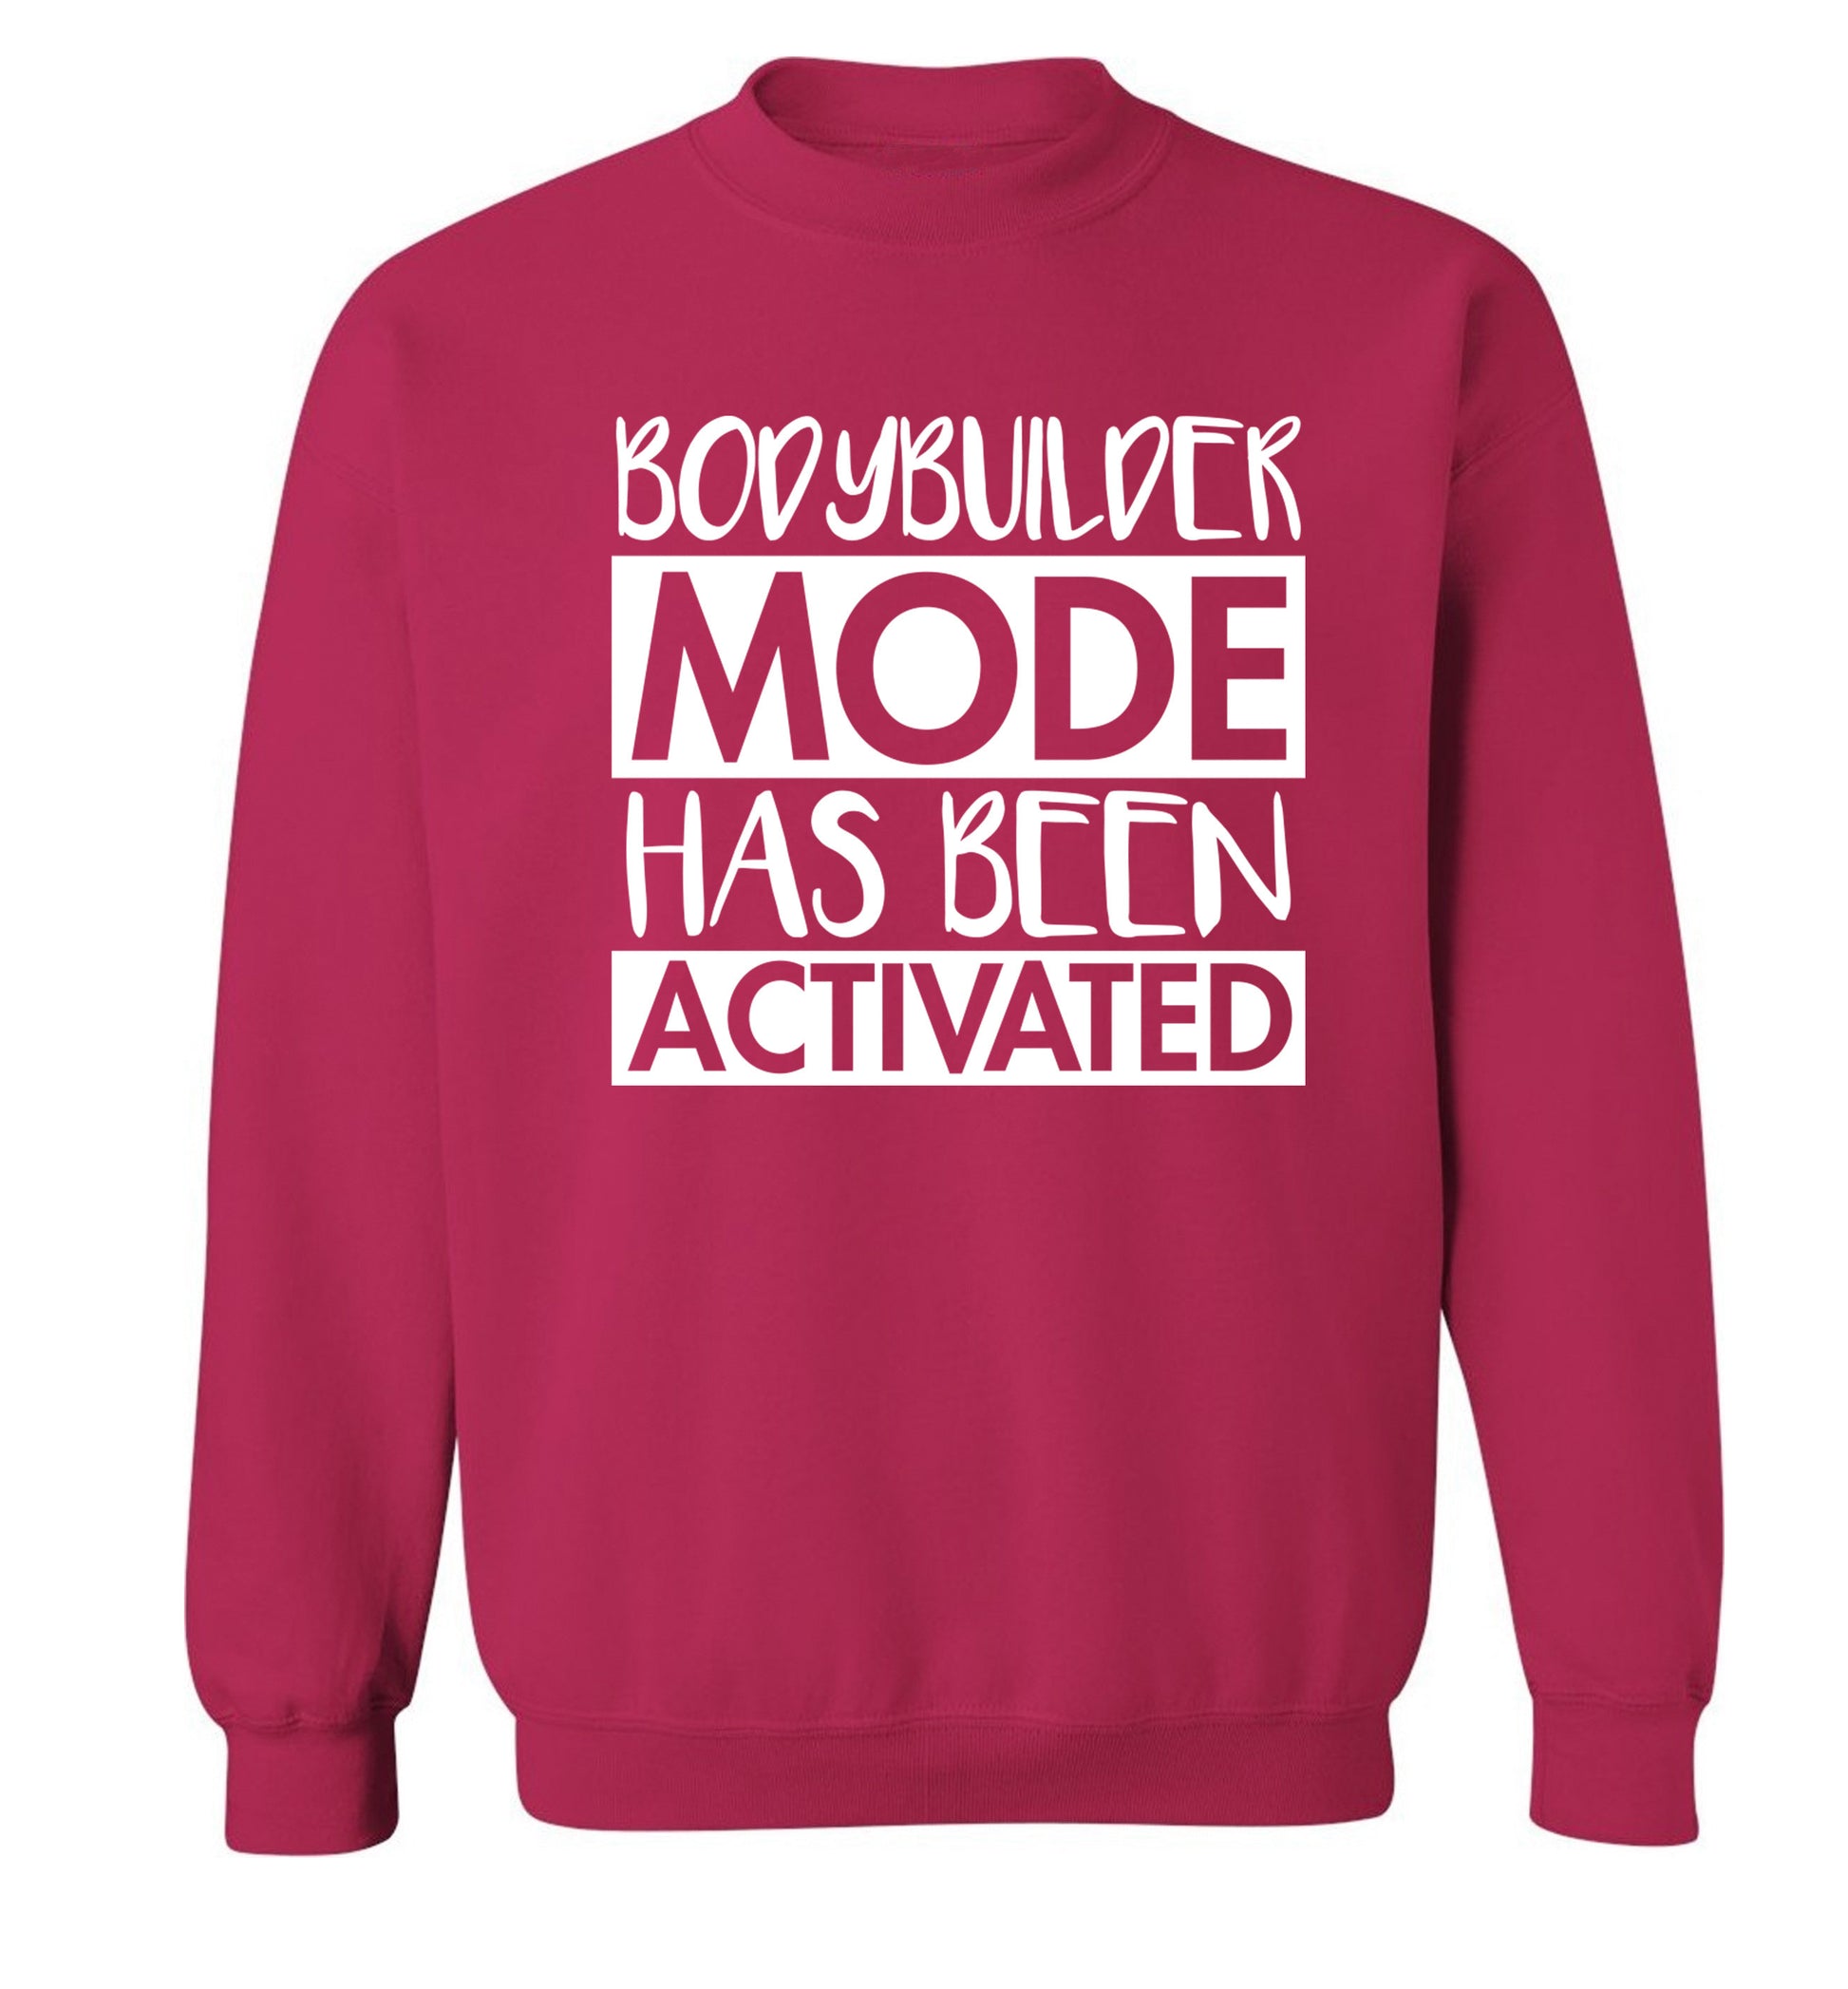 Bodybuilder mode activated Adult's unisex pink Sweater 2XL